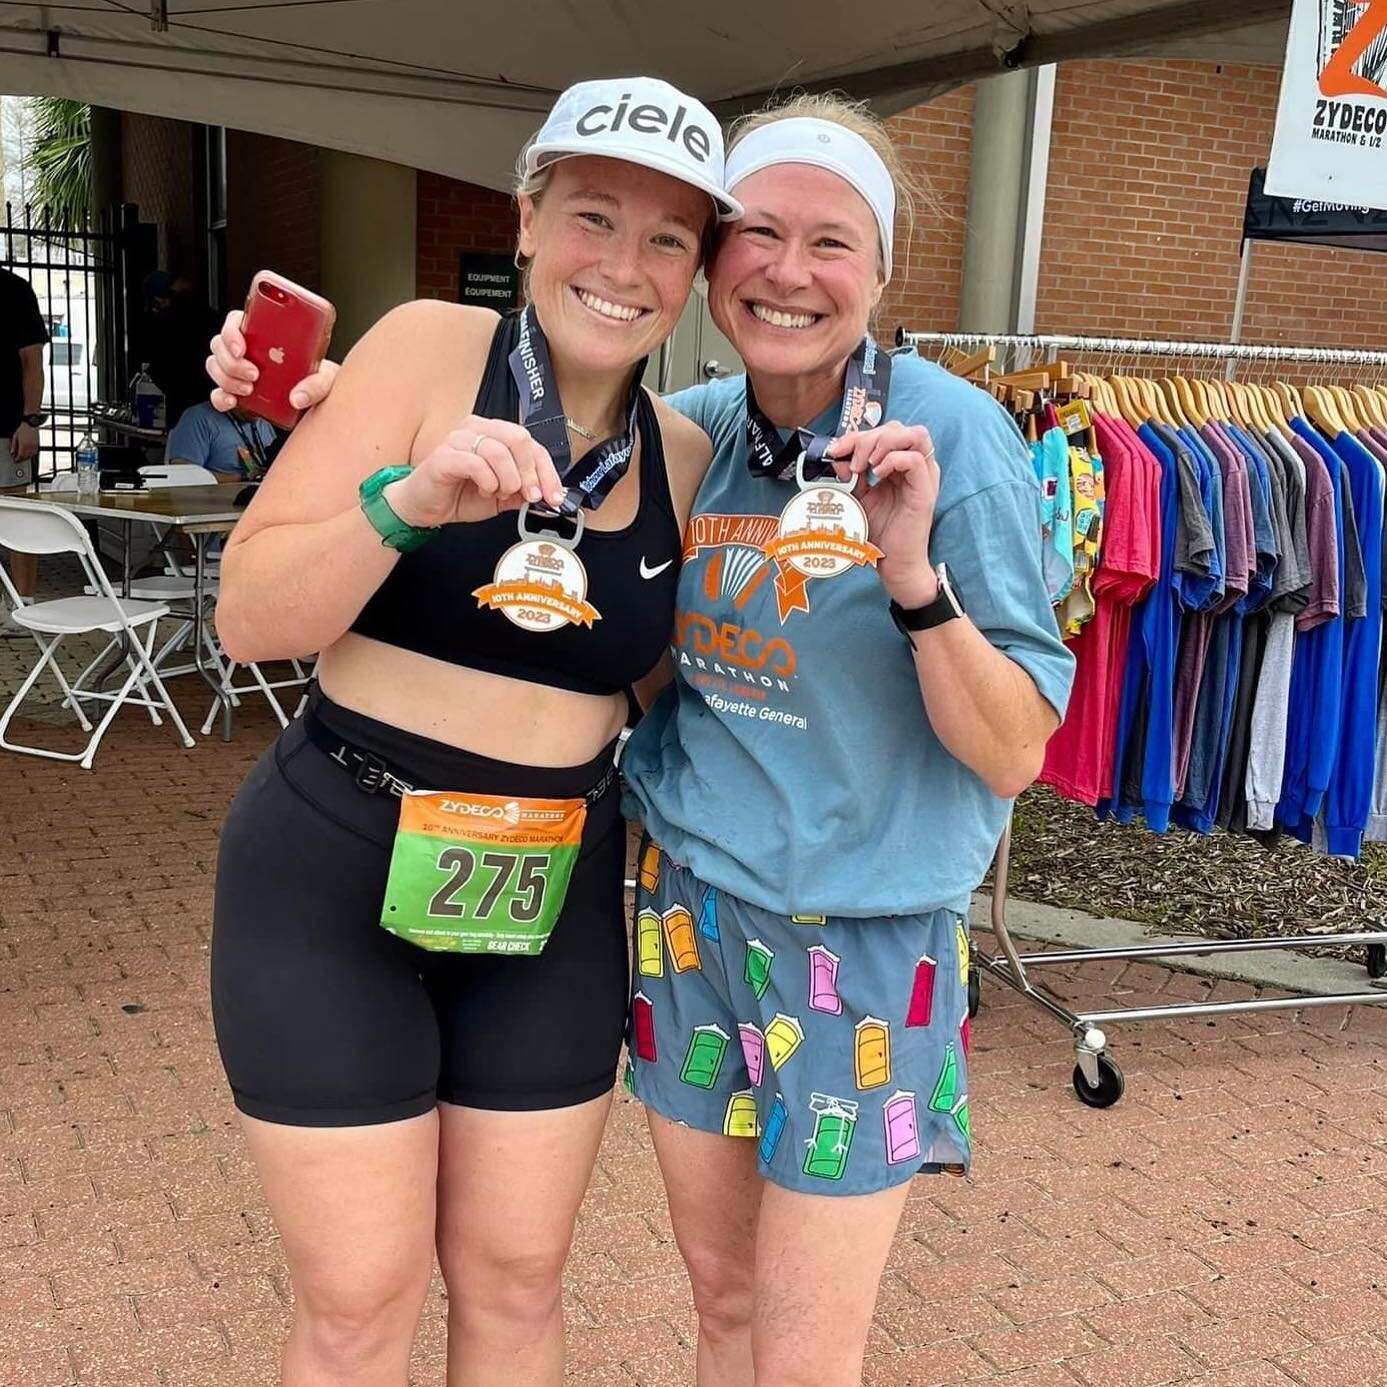 Congratulations to two of our Turkey Trotters! I can&rsquo;t think of any better way to start your day than by running 13.1 miles! Way to go ladies!!!🏃&zwj;♀️